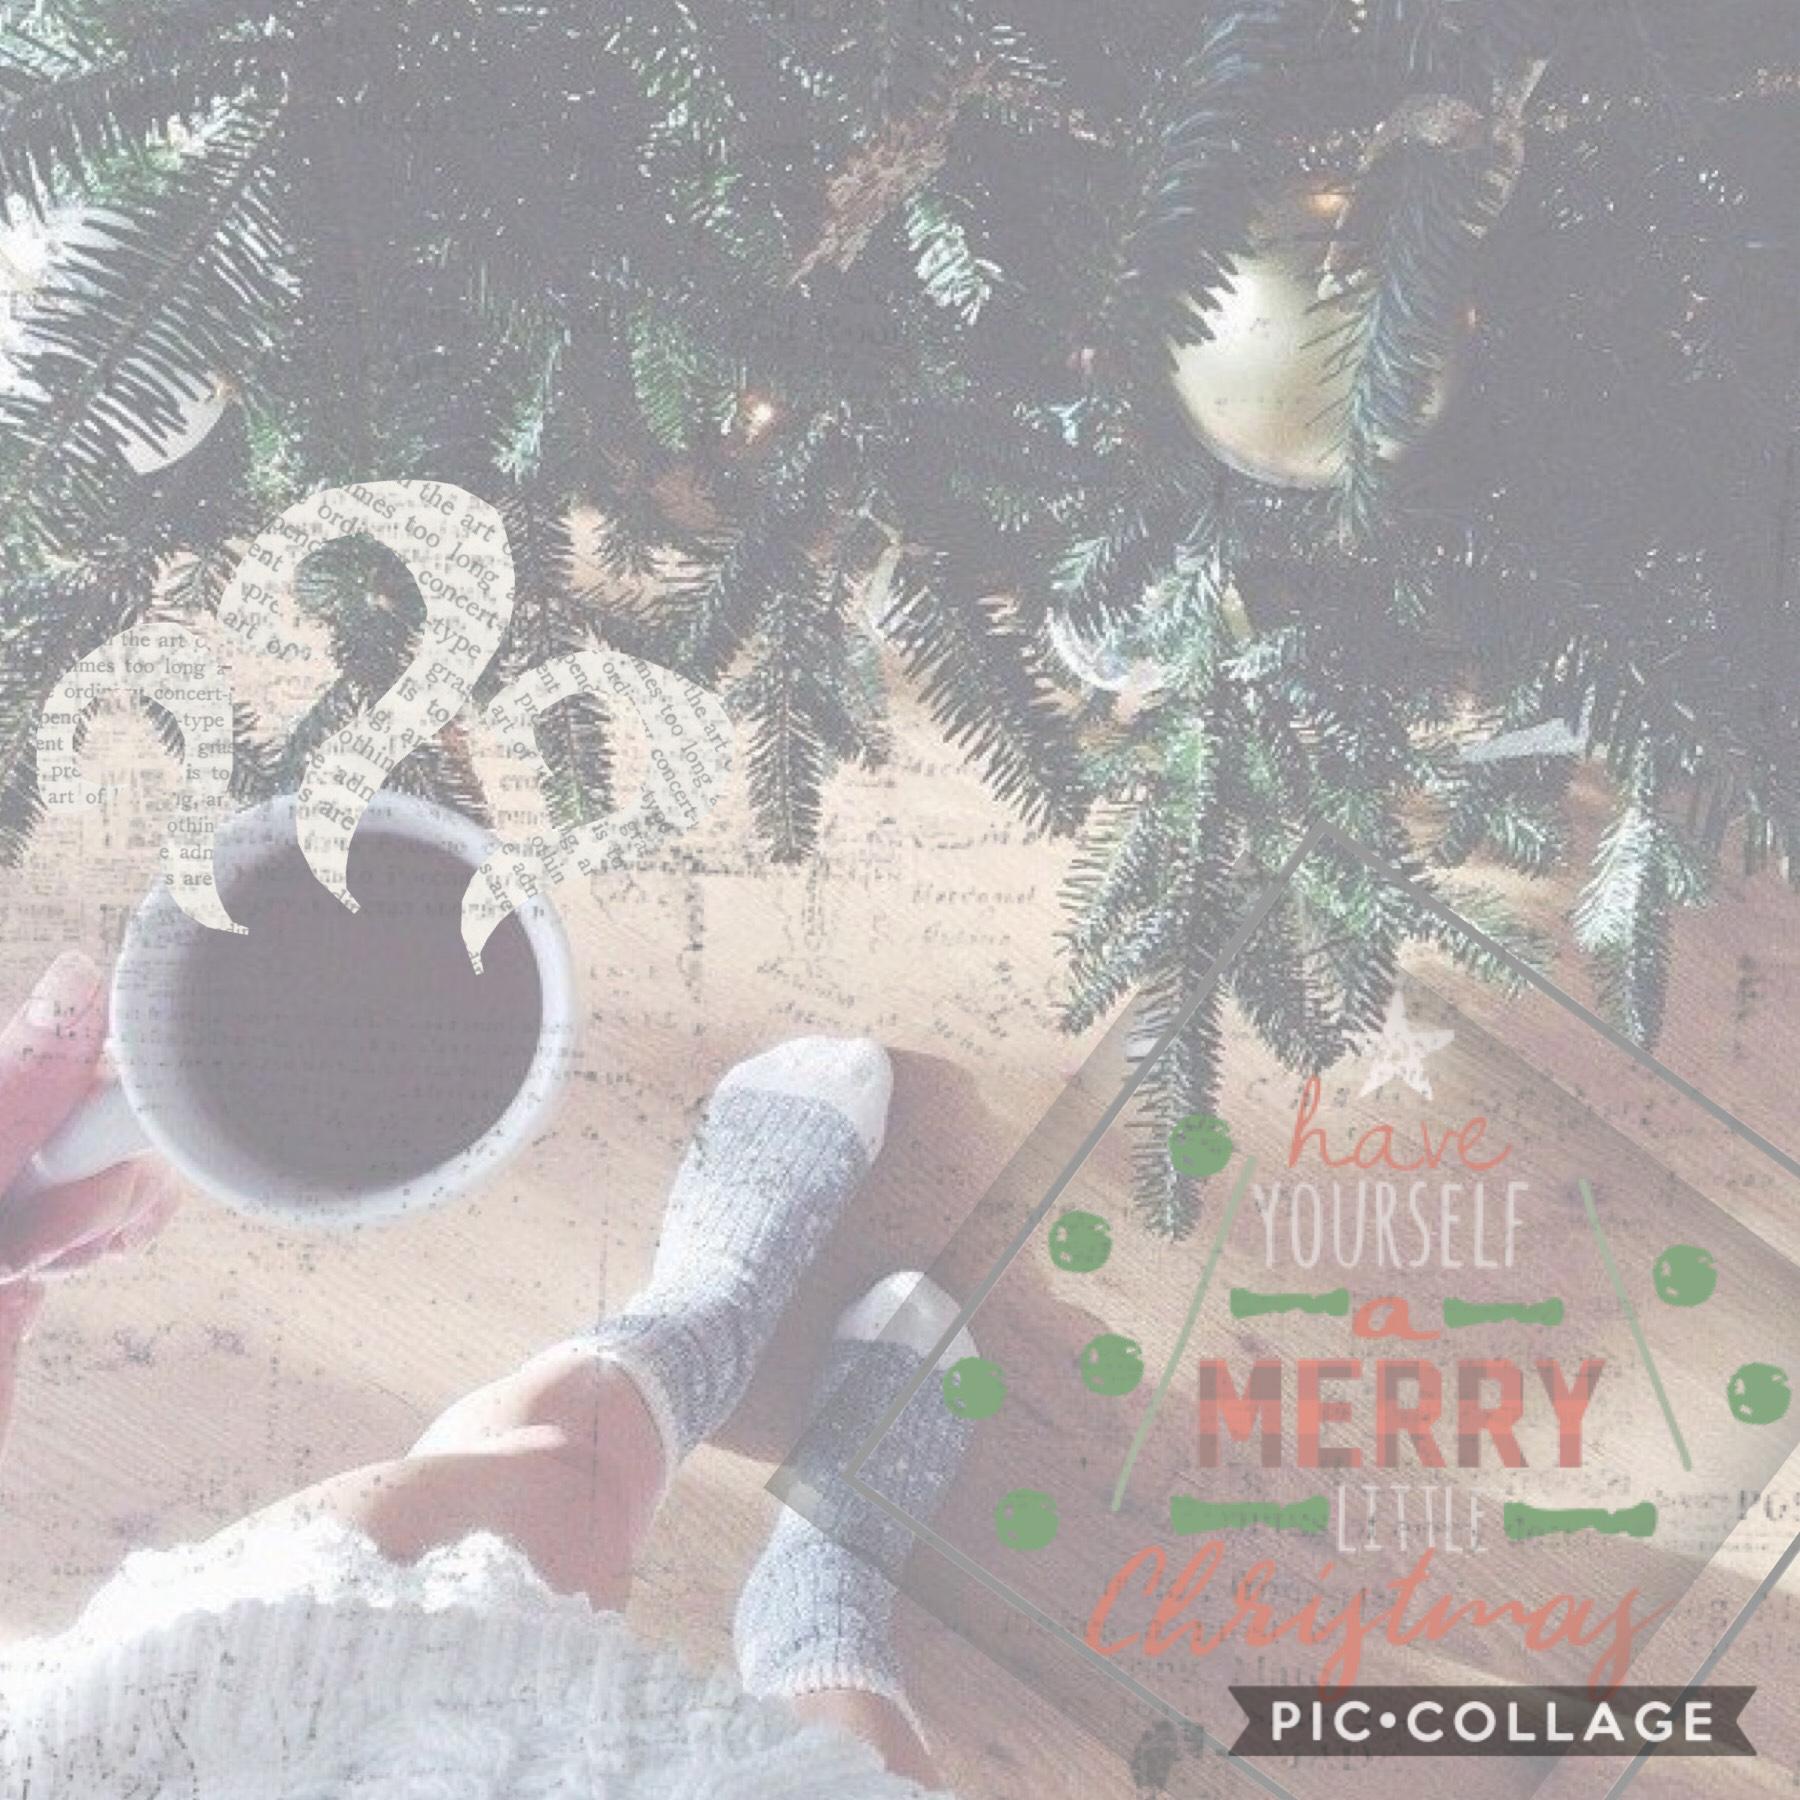 tap!!🎄🎄
I like this a lot actually! I’m making a few finishing touches to another edit I will post soon. I don’t like it as much as this one, but it’s okay. QOTD: Christmas or Thanksgiving? AOTD: How is this even a question, Christmas of course!